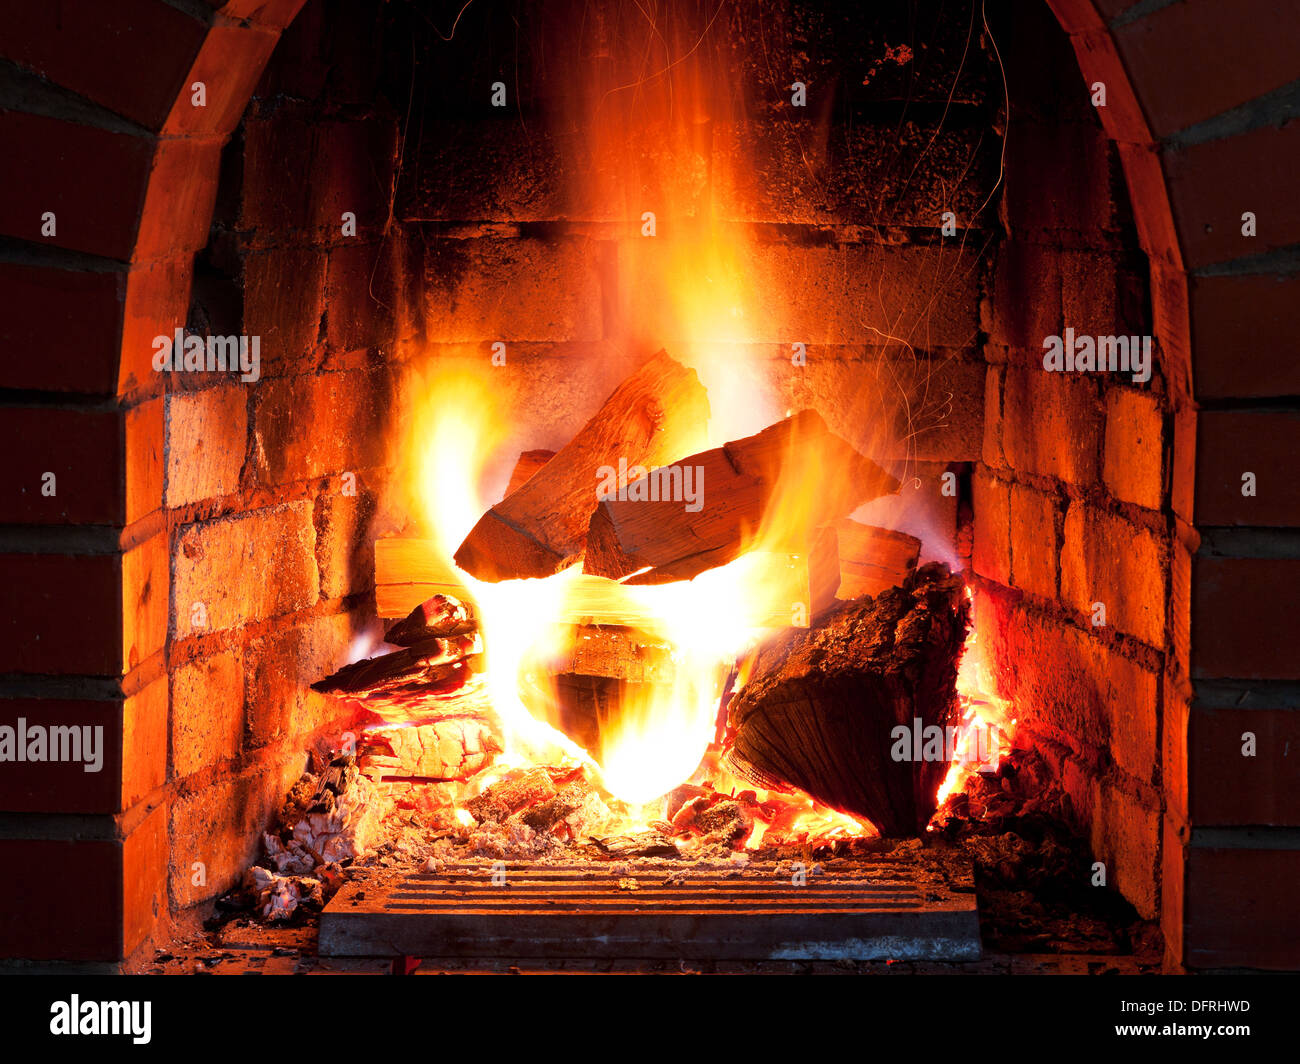 flames of fire in fireplace in evening time Stock Photo